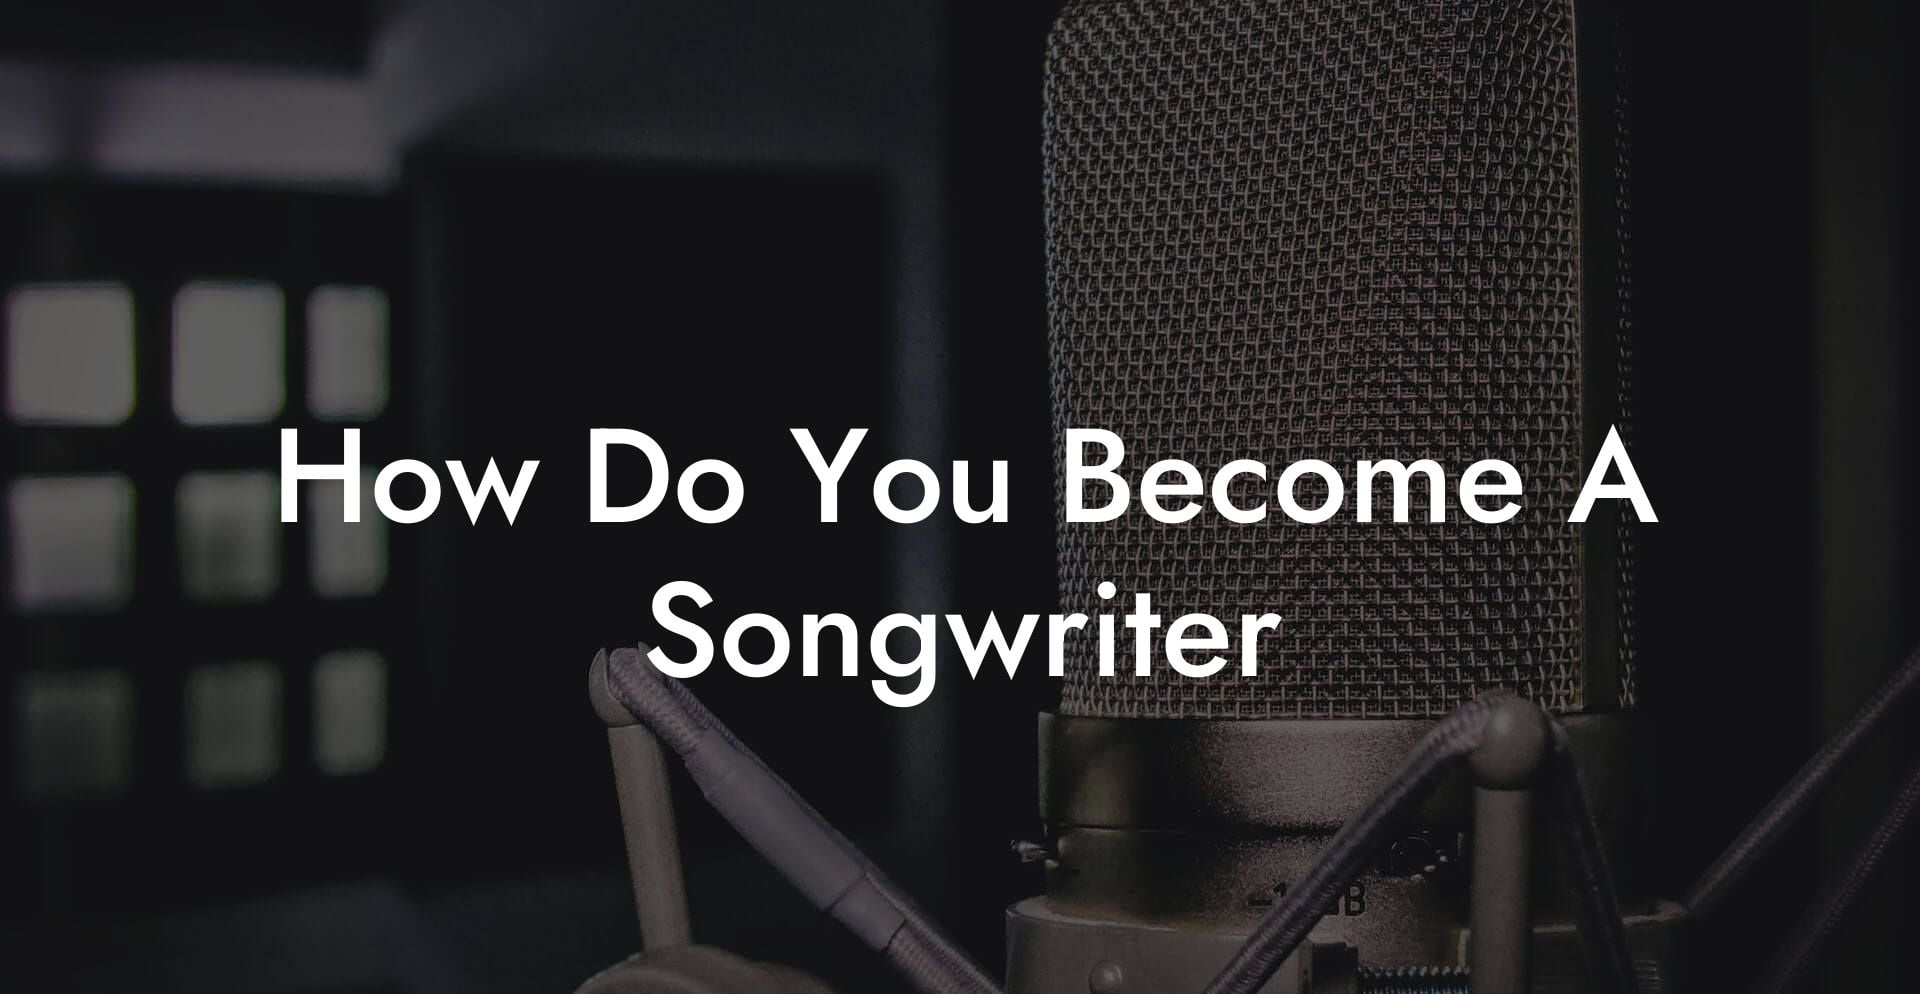 how do you become a songwriter lyric assistant